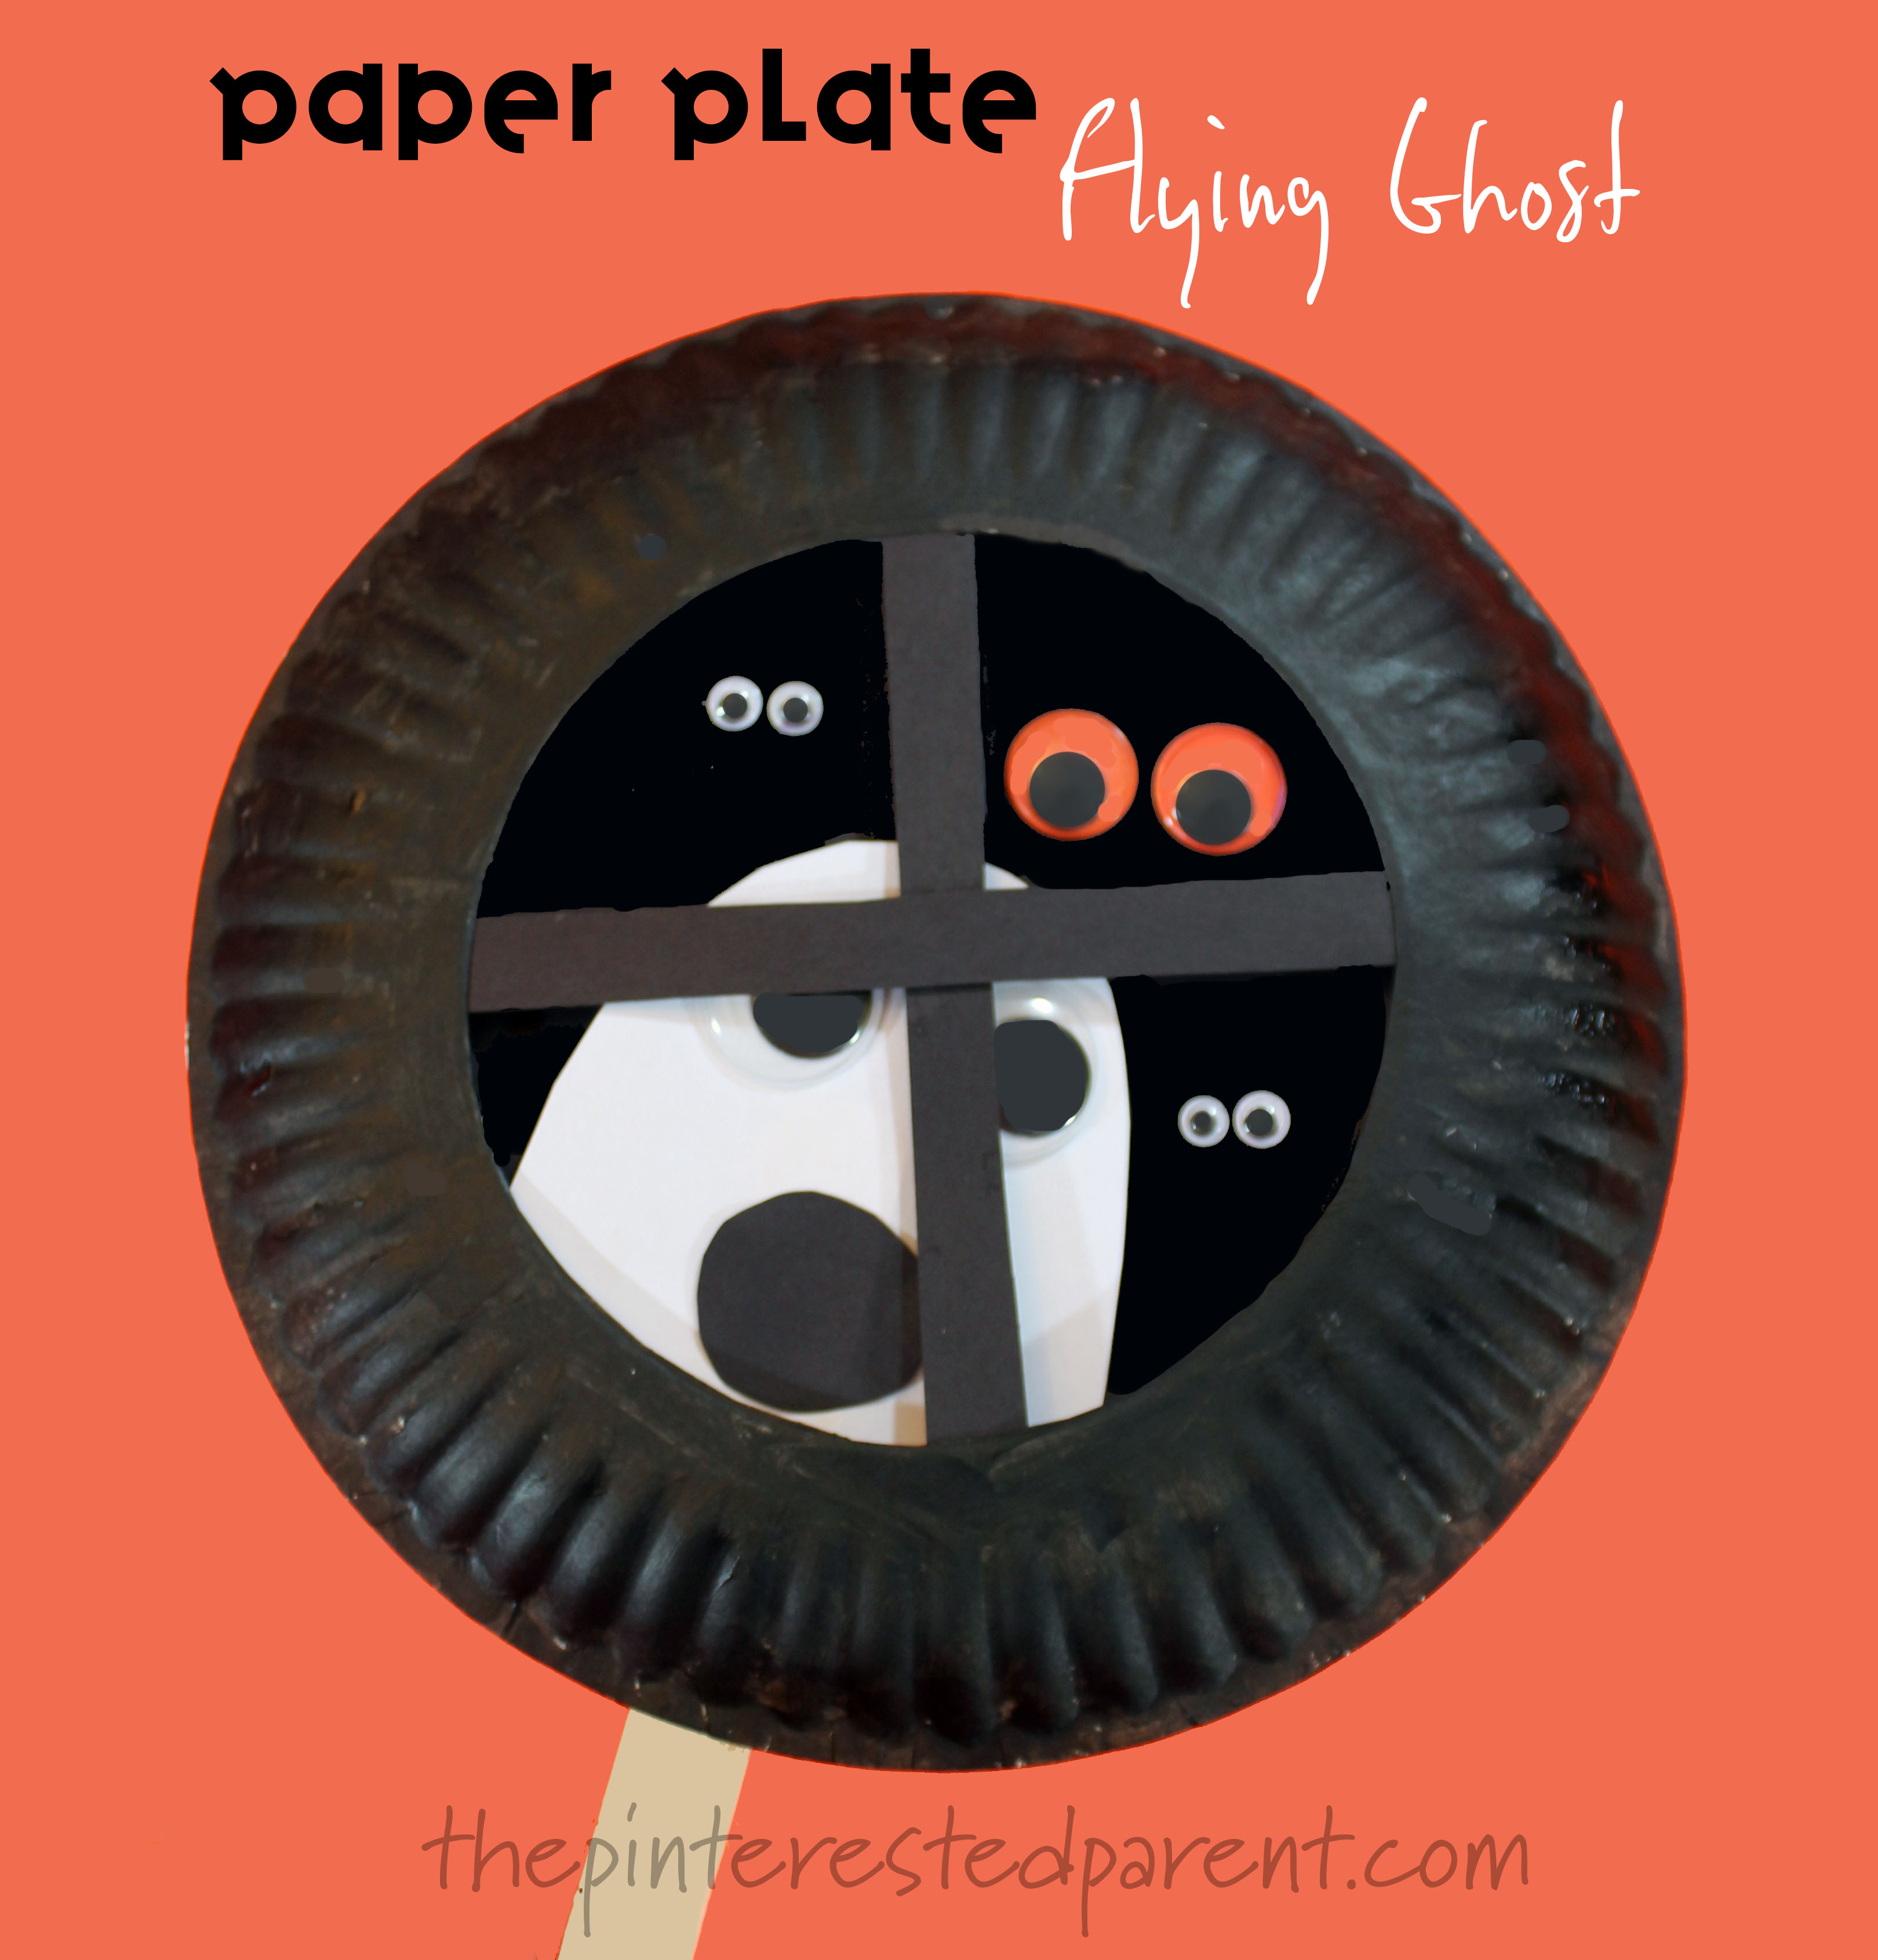 Paper Plate Flying Ghost in a window - Halloween arts and crafts for kids